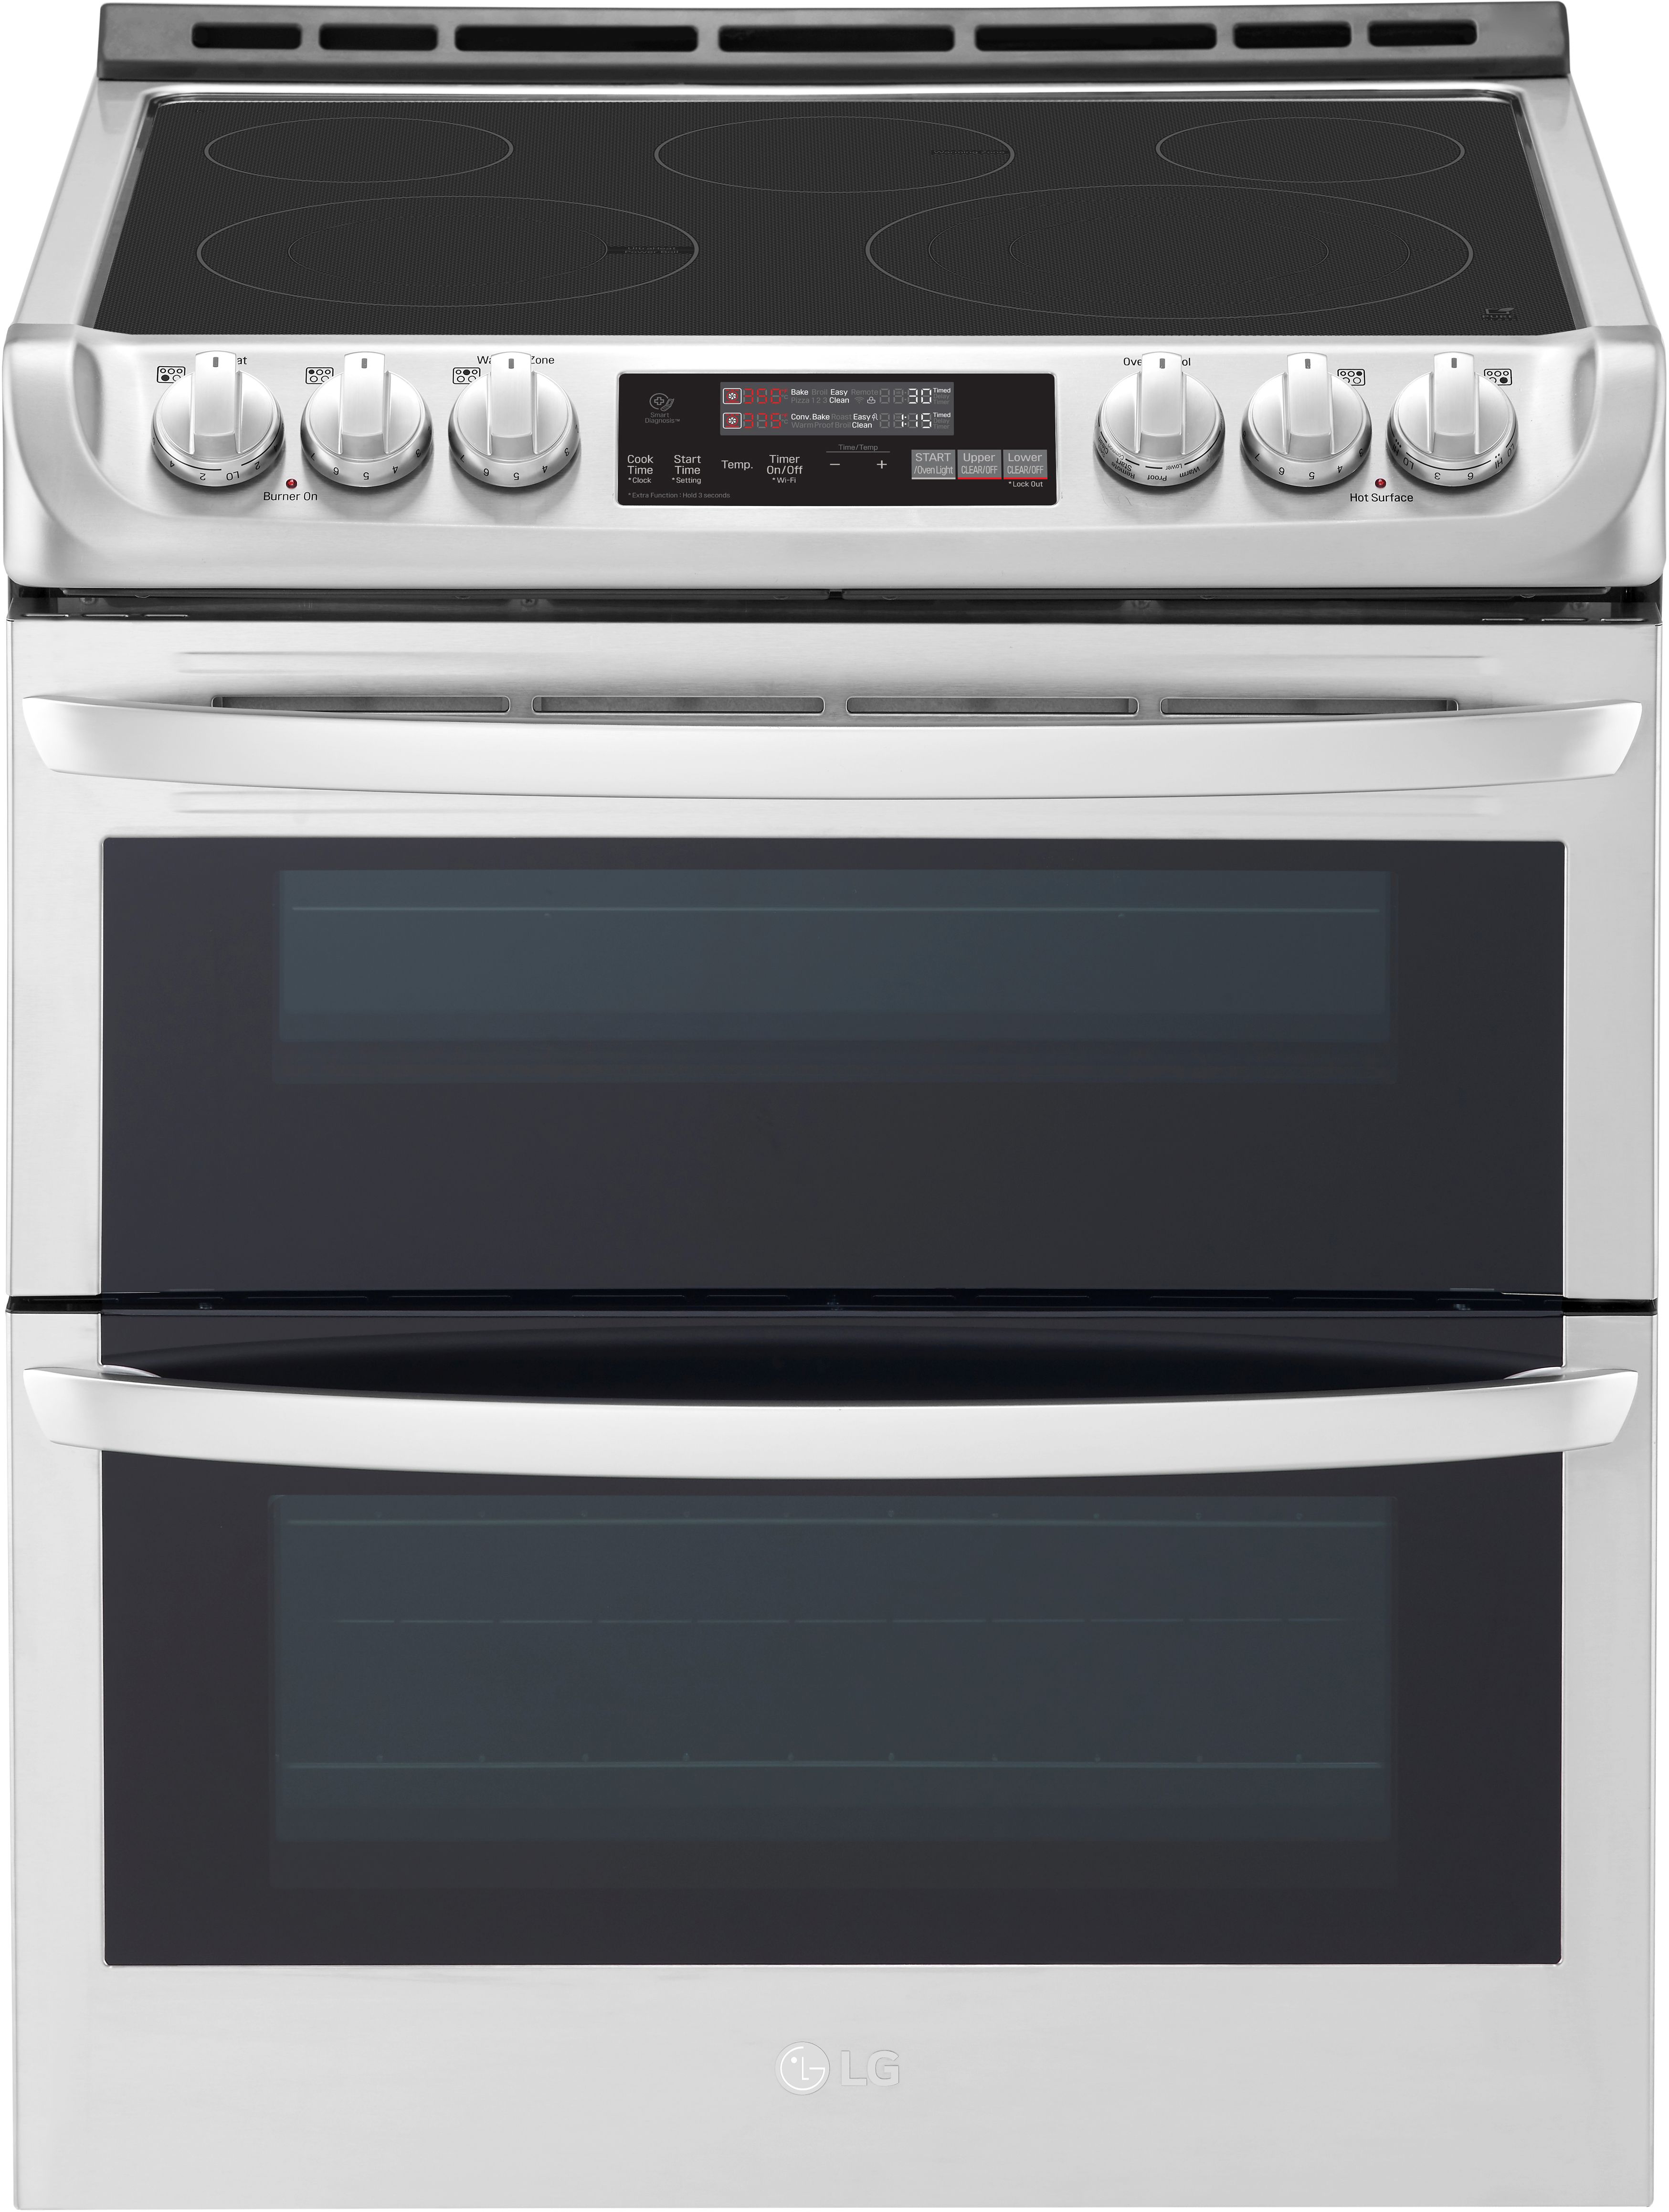 LG 30" Stainless Steel Slide In Electric Double Oven Range-LTE4815ST